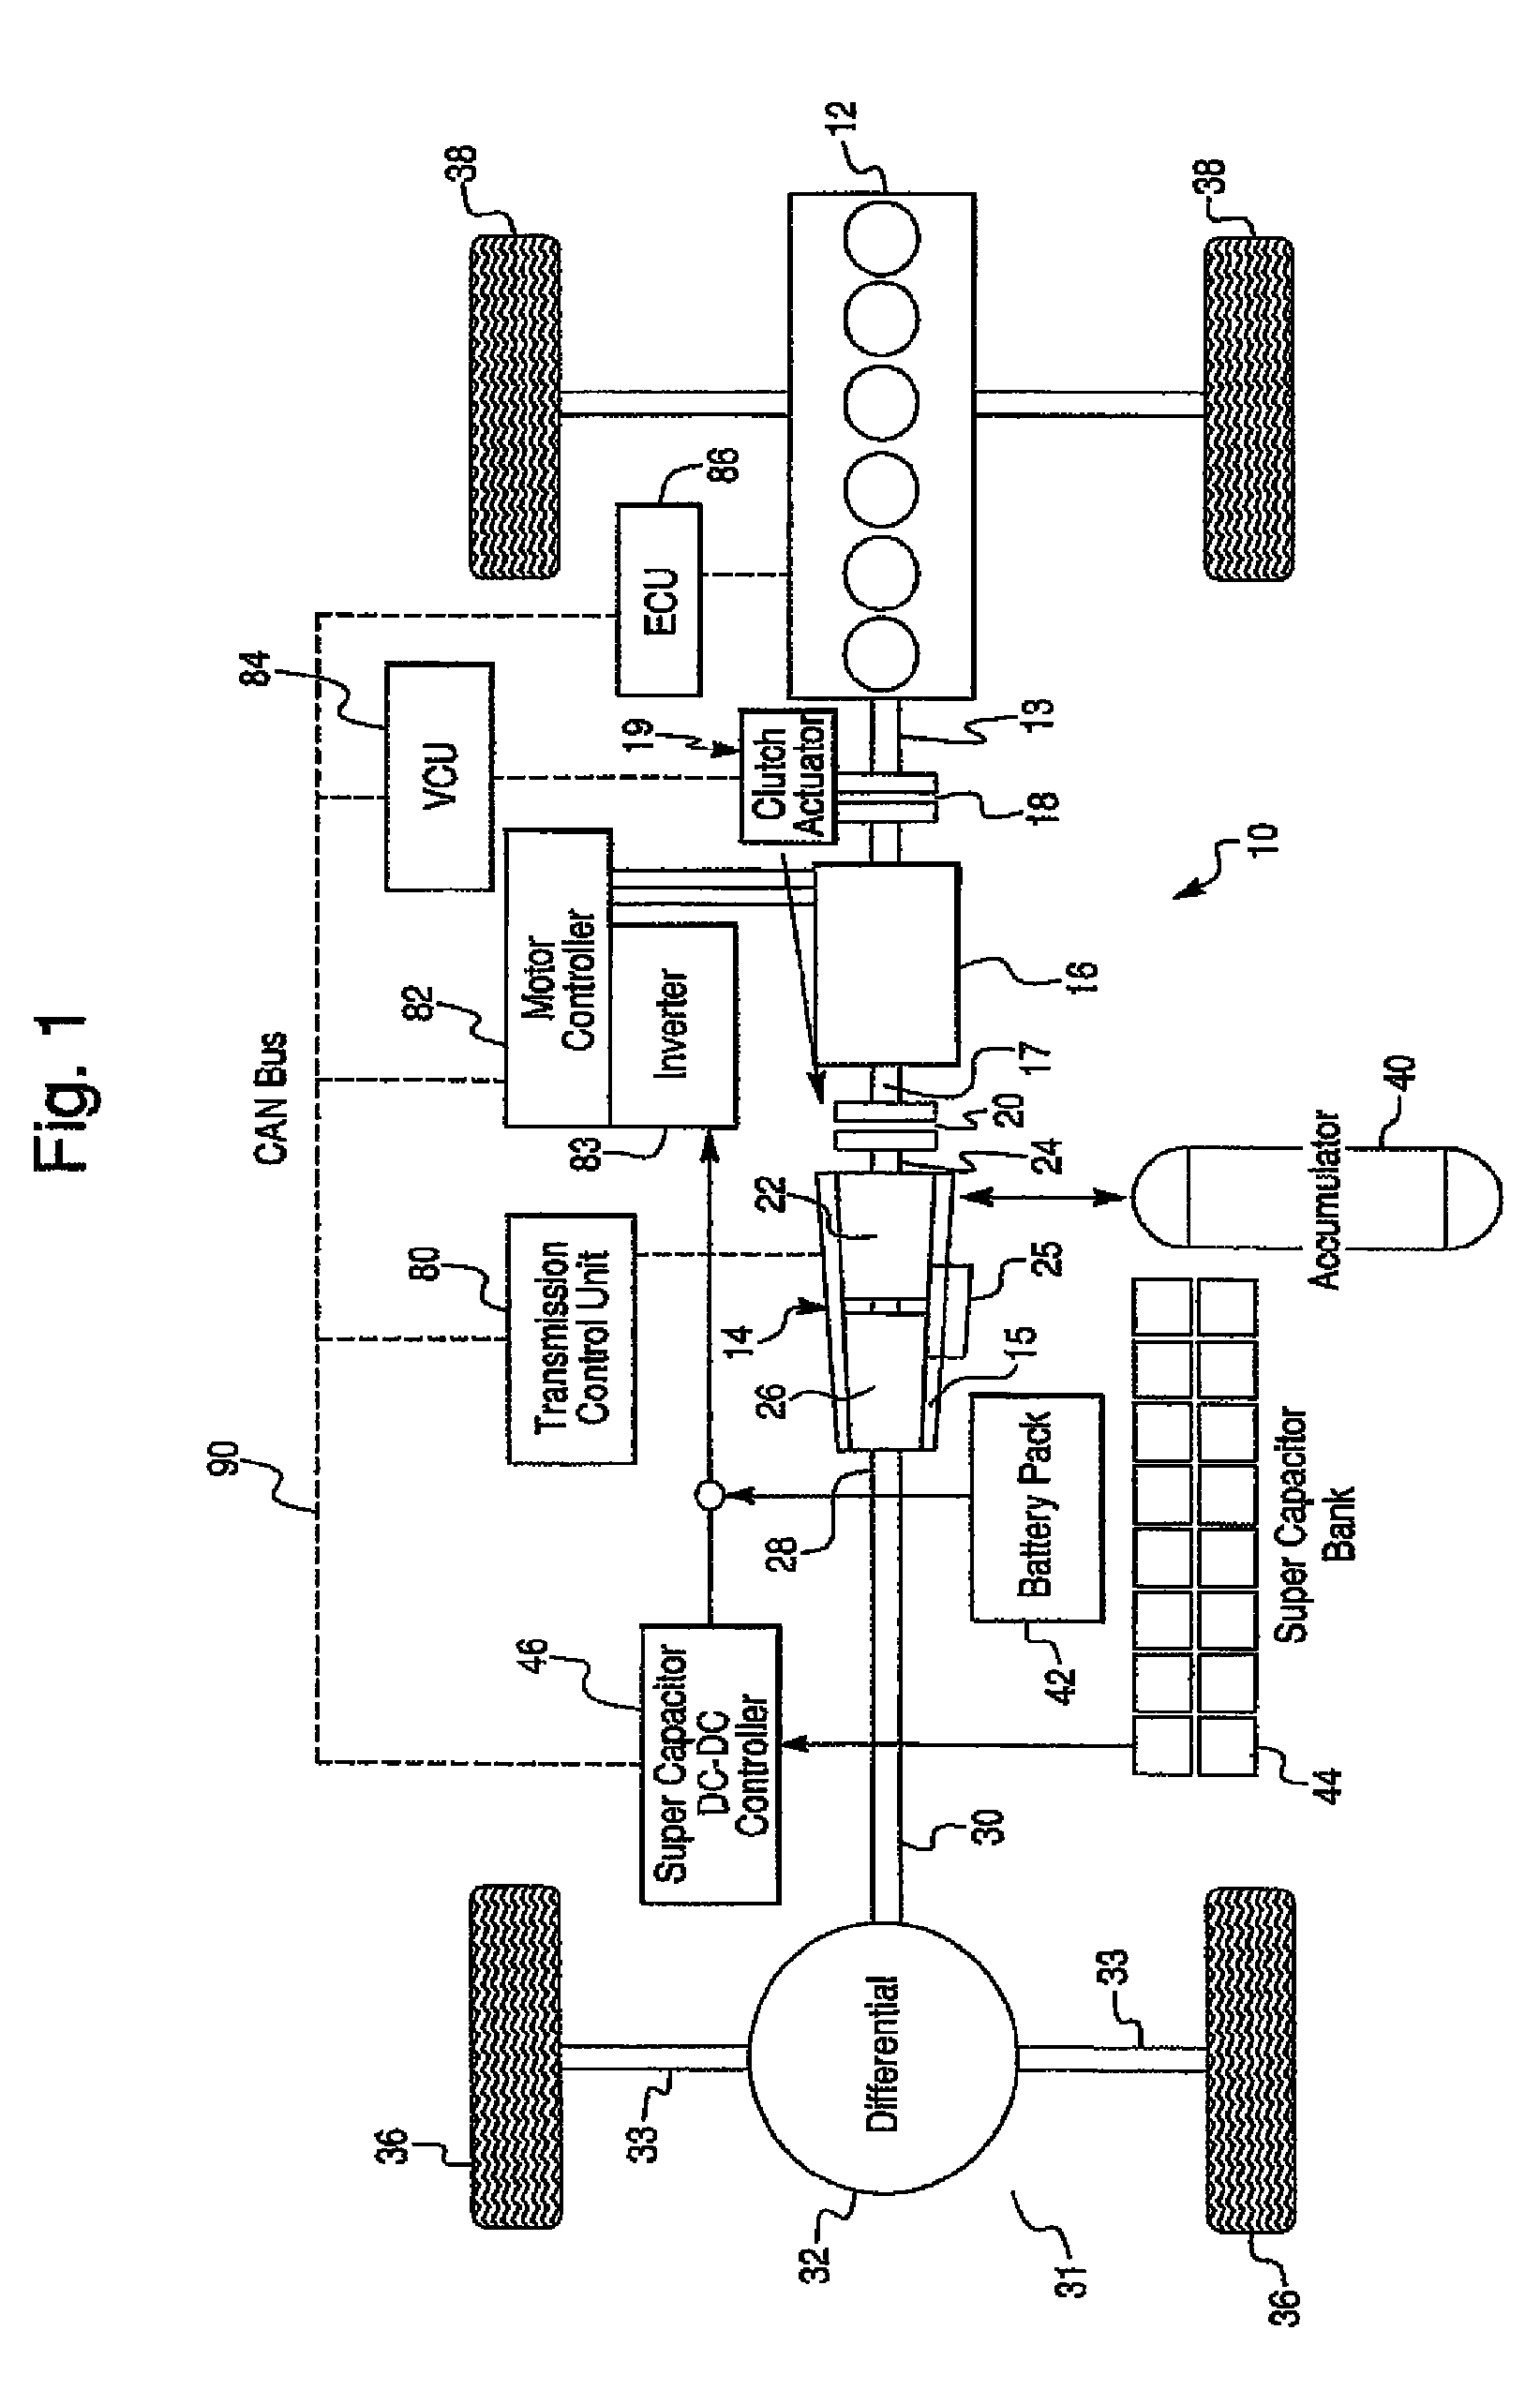 Hydro-electric hybrid drive system for motor vehicle